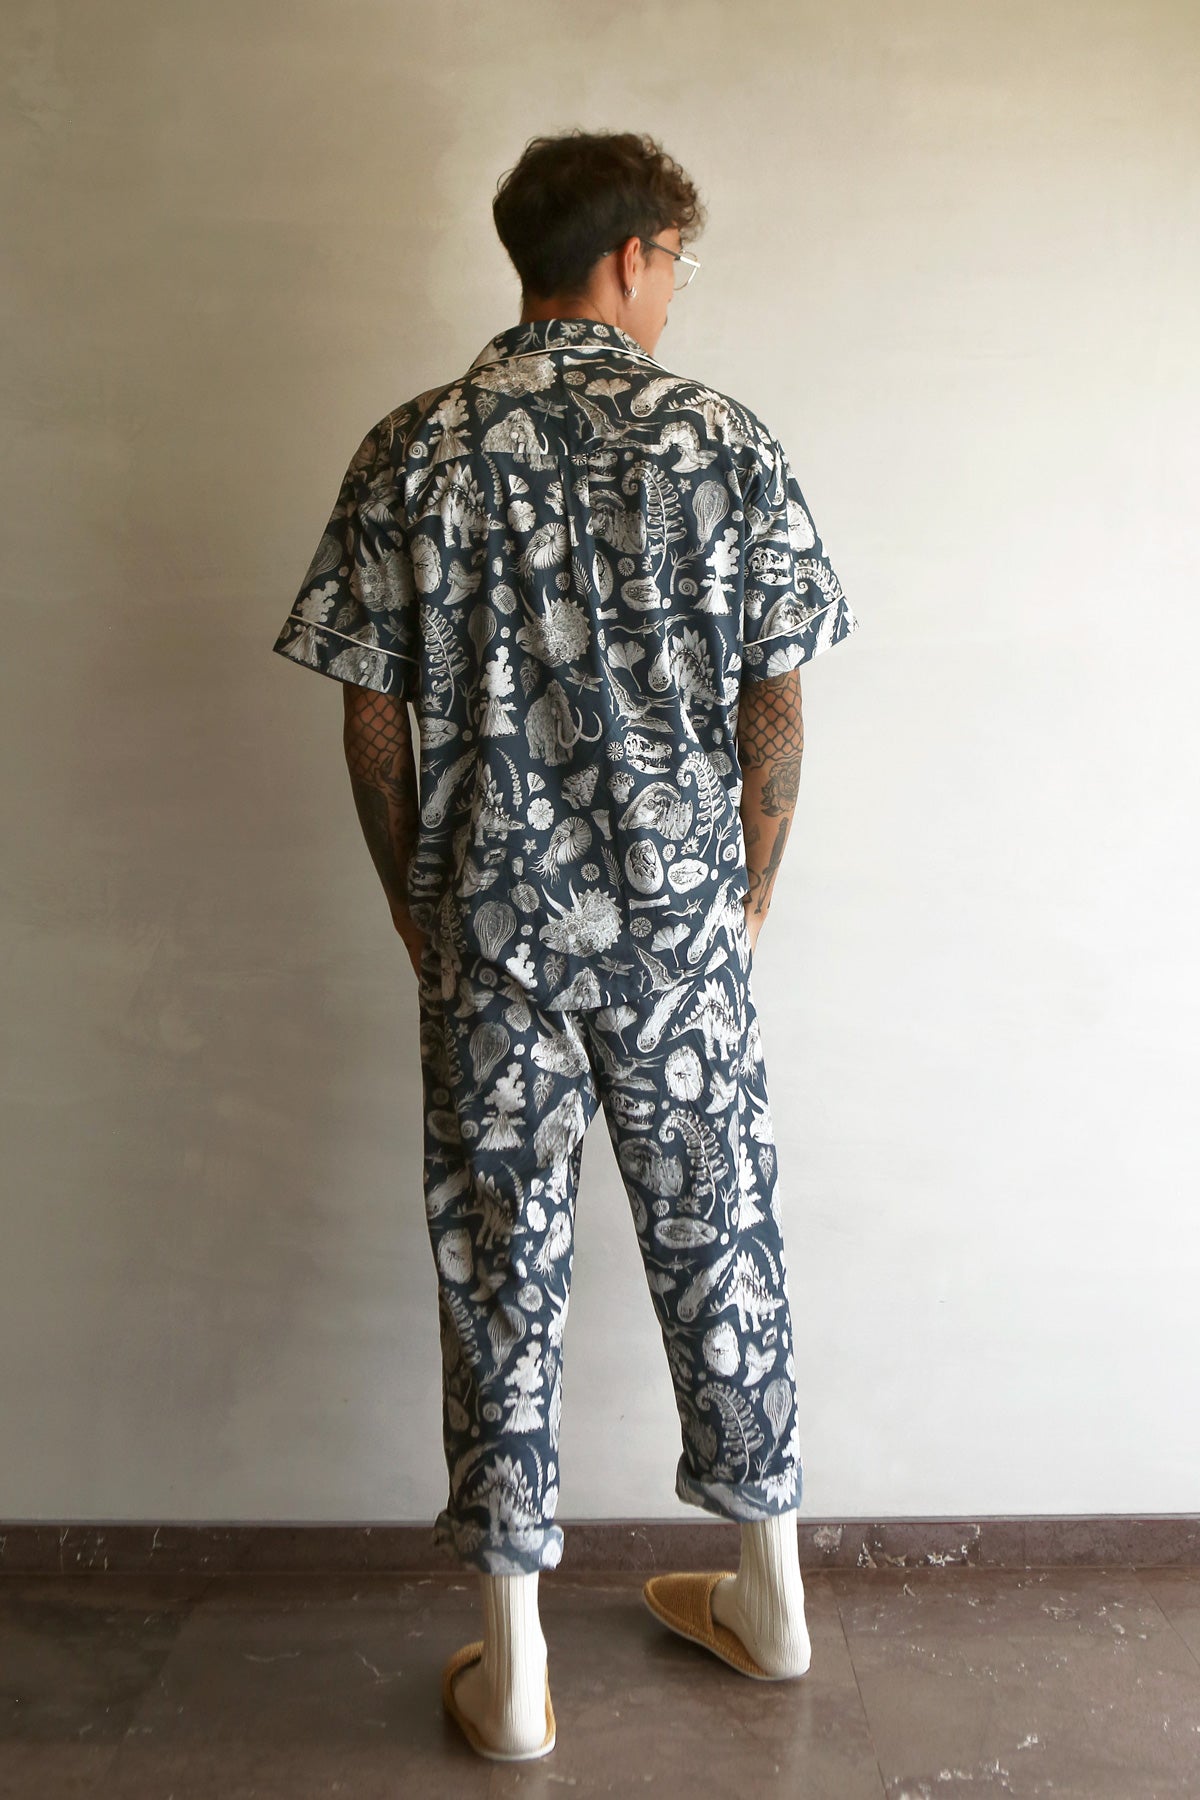 Load image into Gallery viewer, Inspired by the beautiful prehistoric dinosaurier illustration by Tattoo-Artist Suflanda this Mens Pyjama Set guarantes sweet dreams combined with vintage 60’s design.
